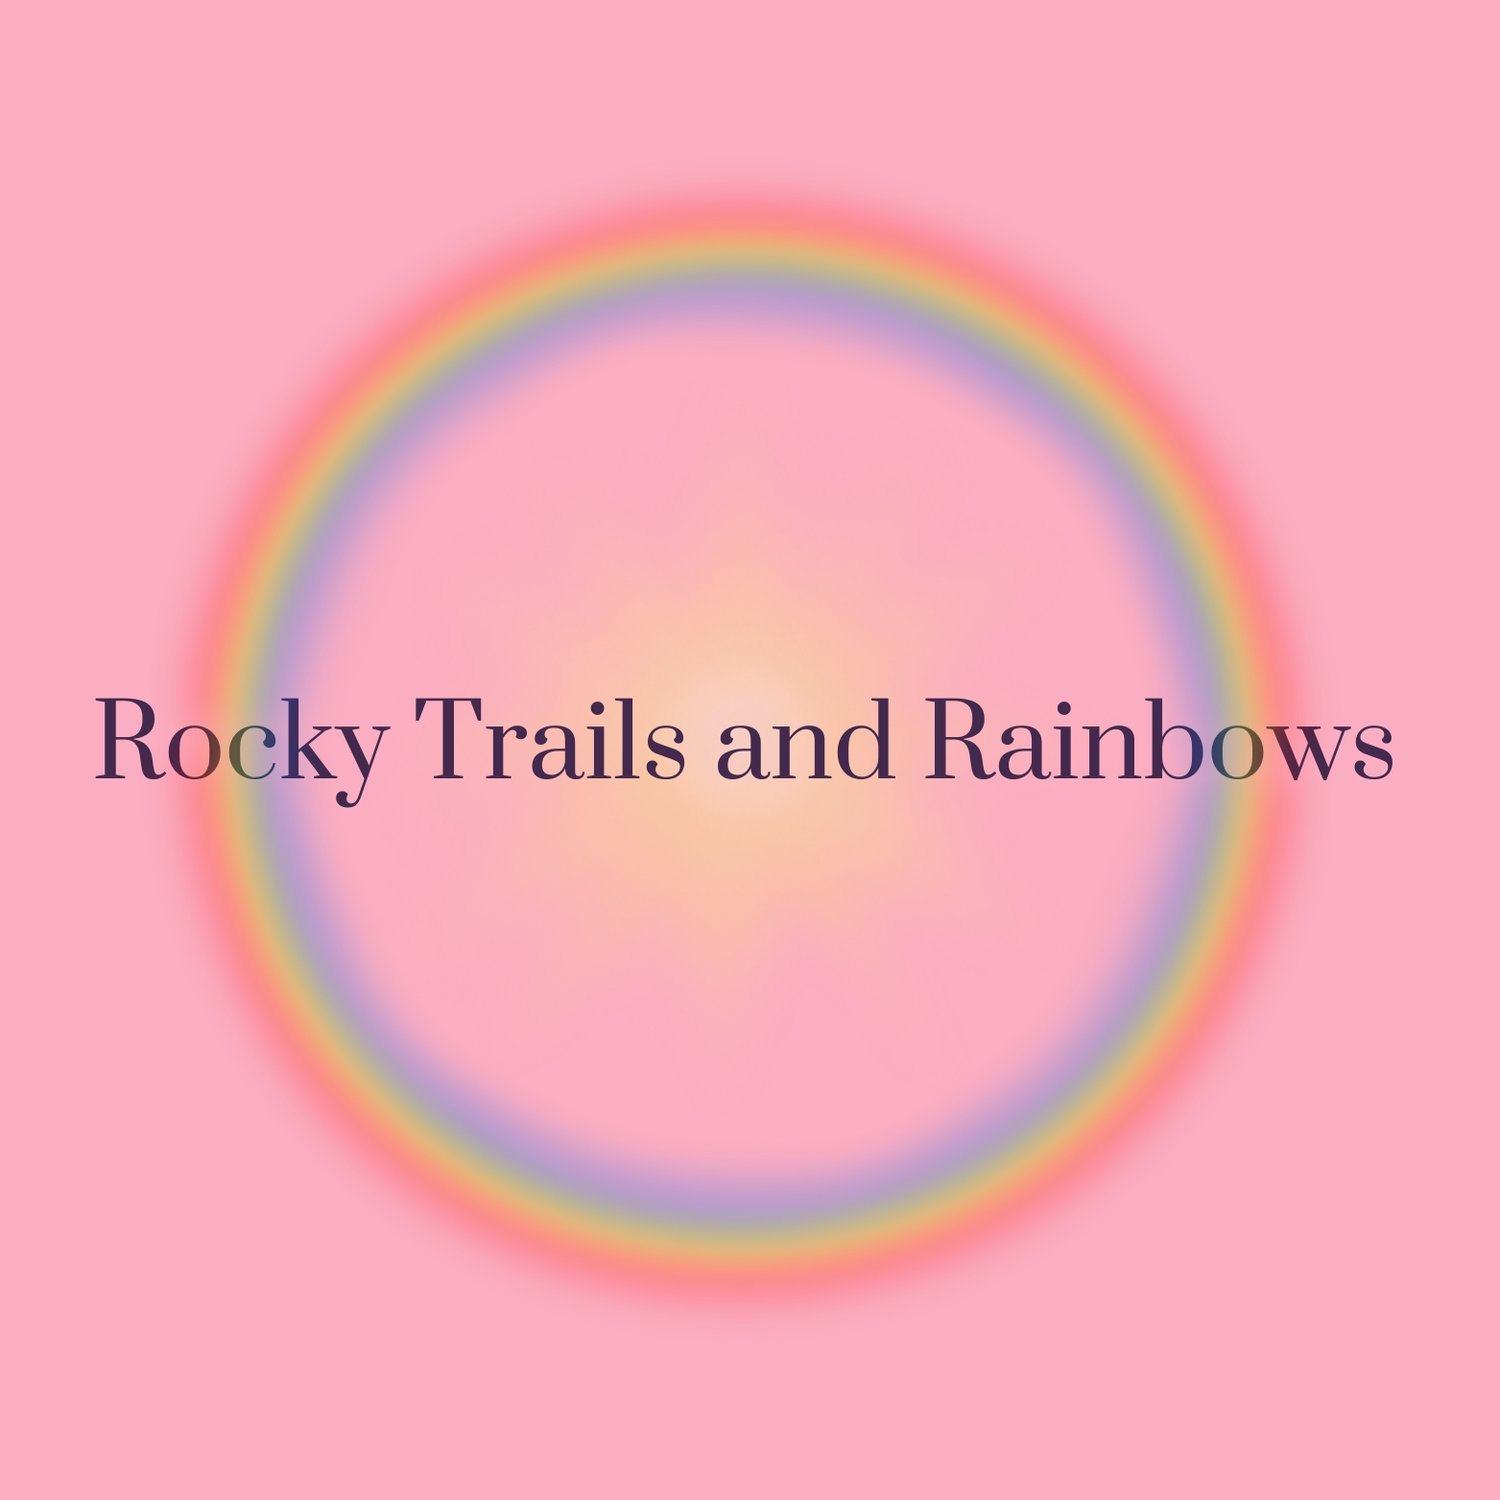 Rocky Trails and Rainbows